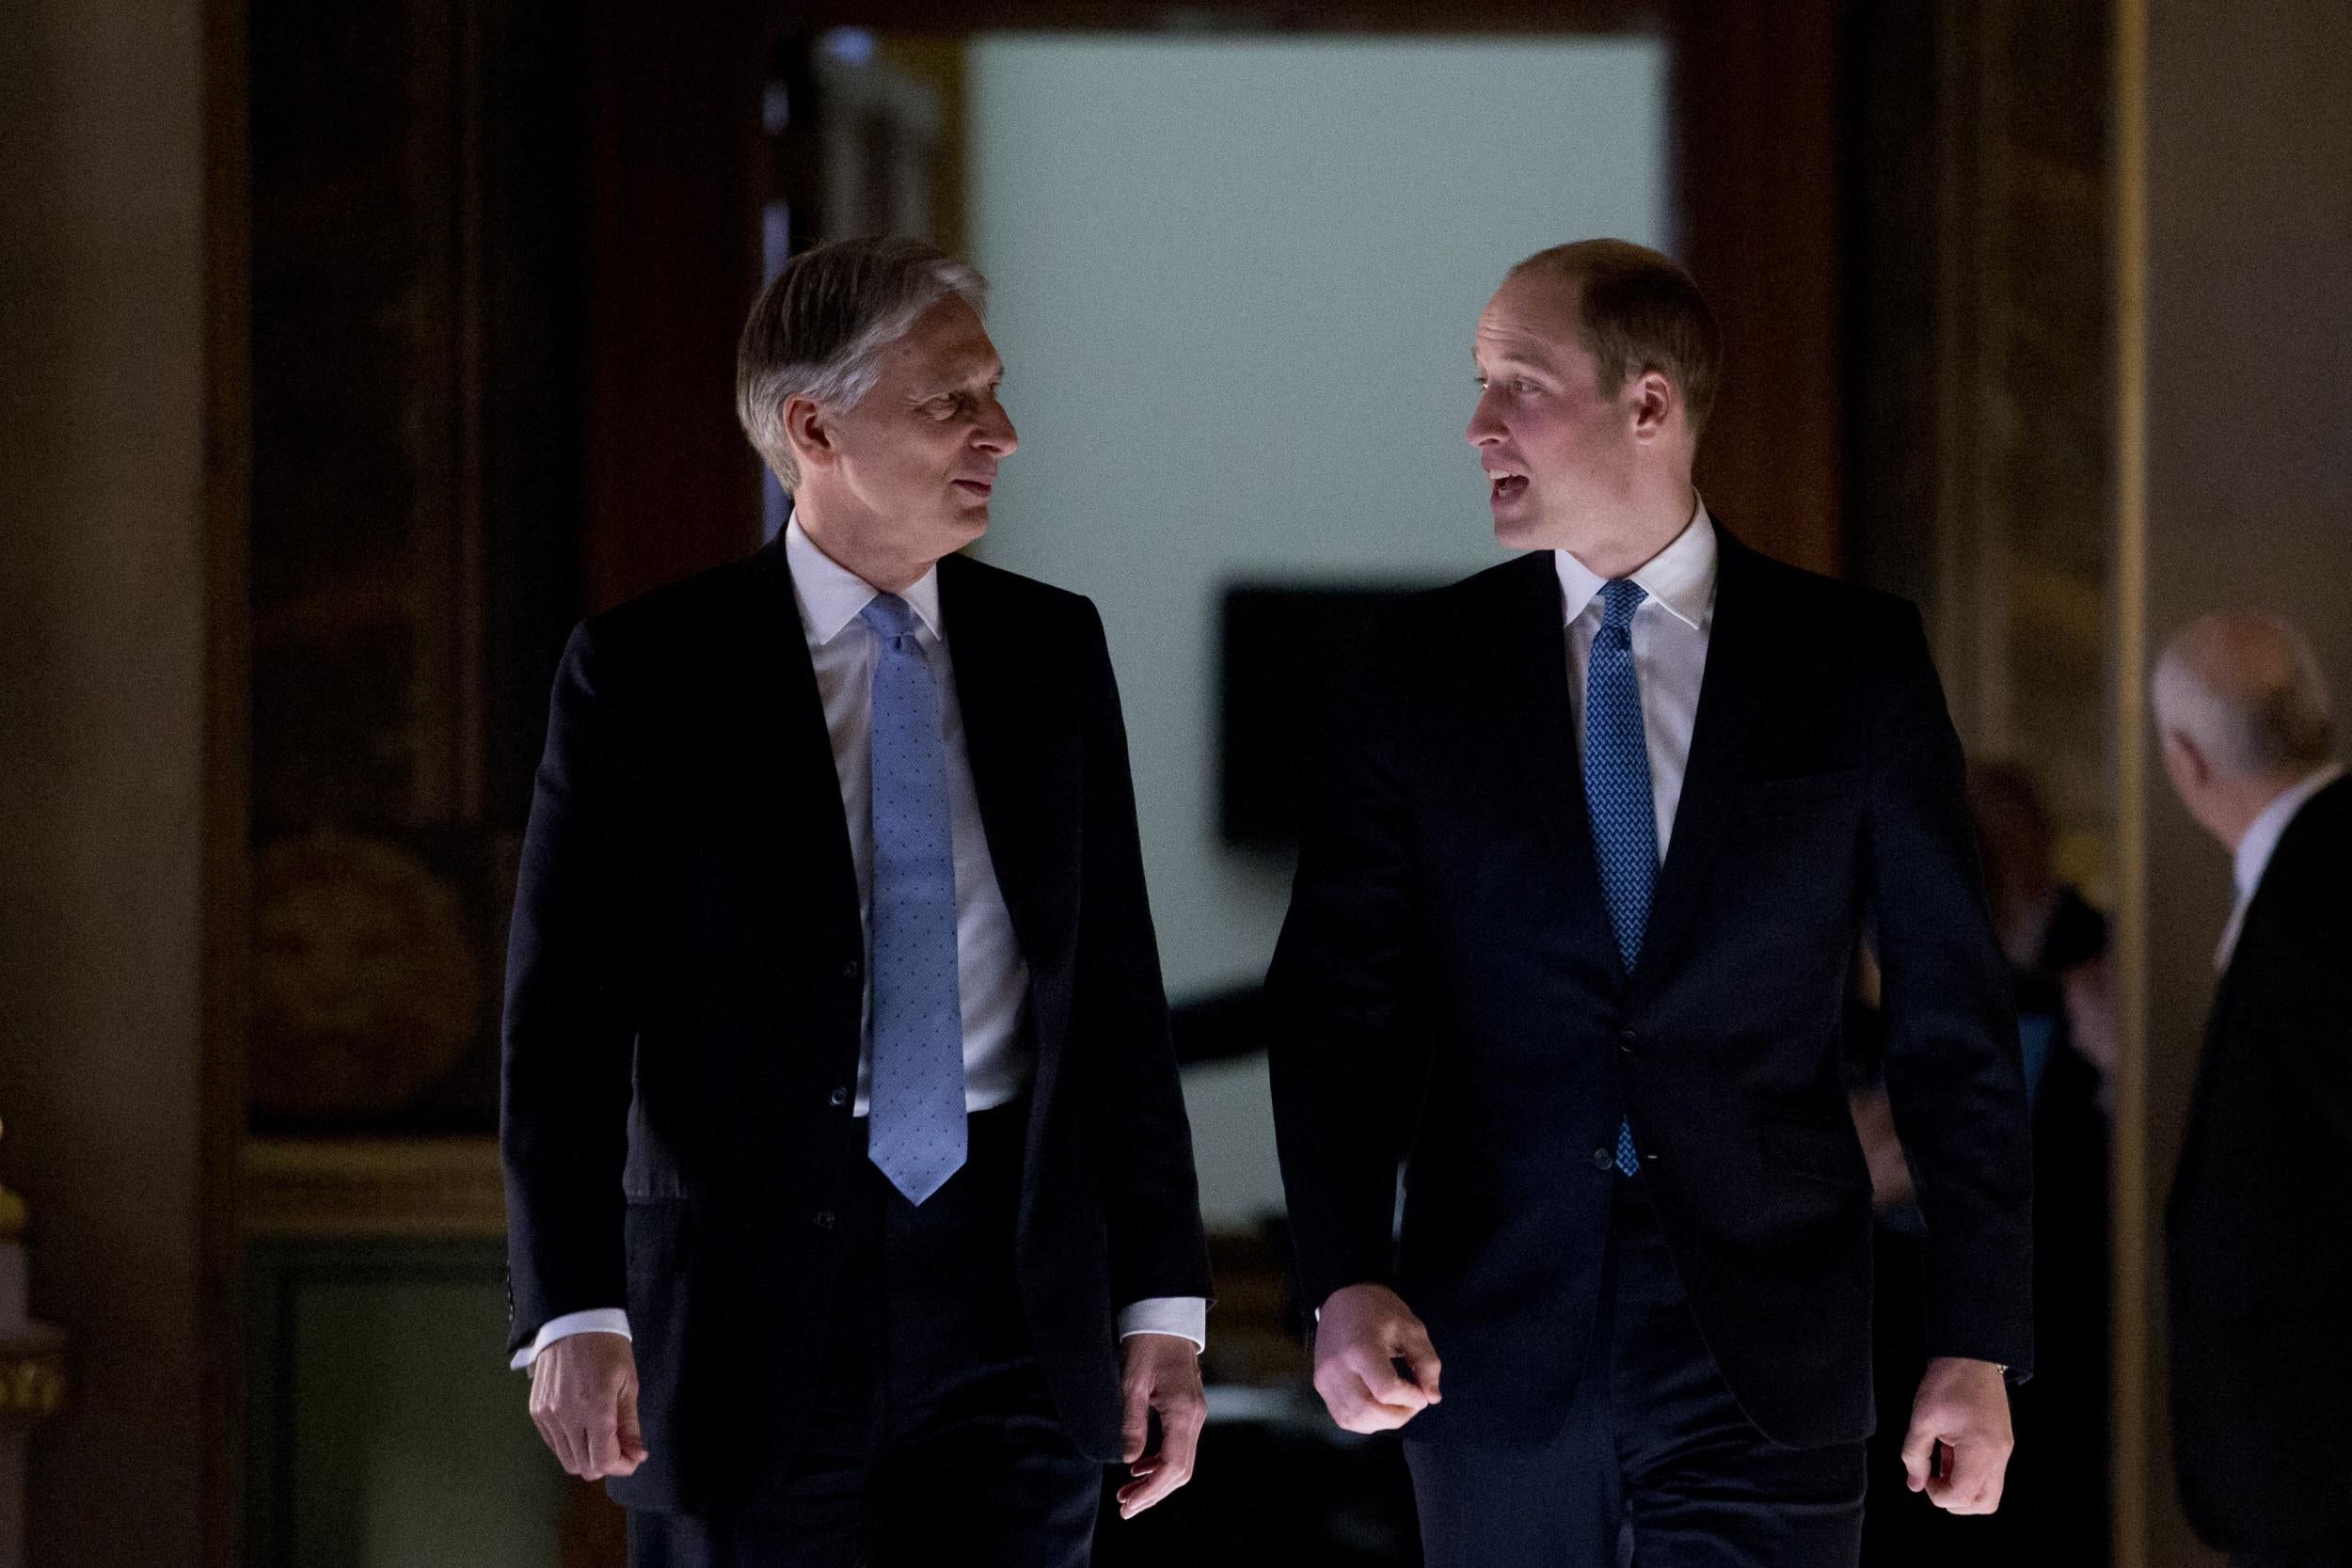 Prince William walks with Foreign Secretary Philip Hammond as he visits the Foreign and Commonwealth Office